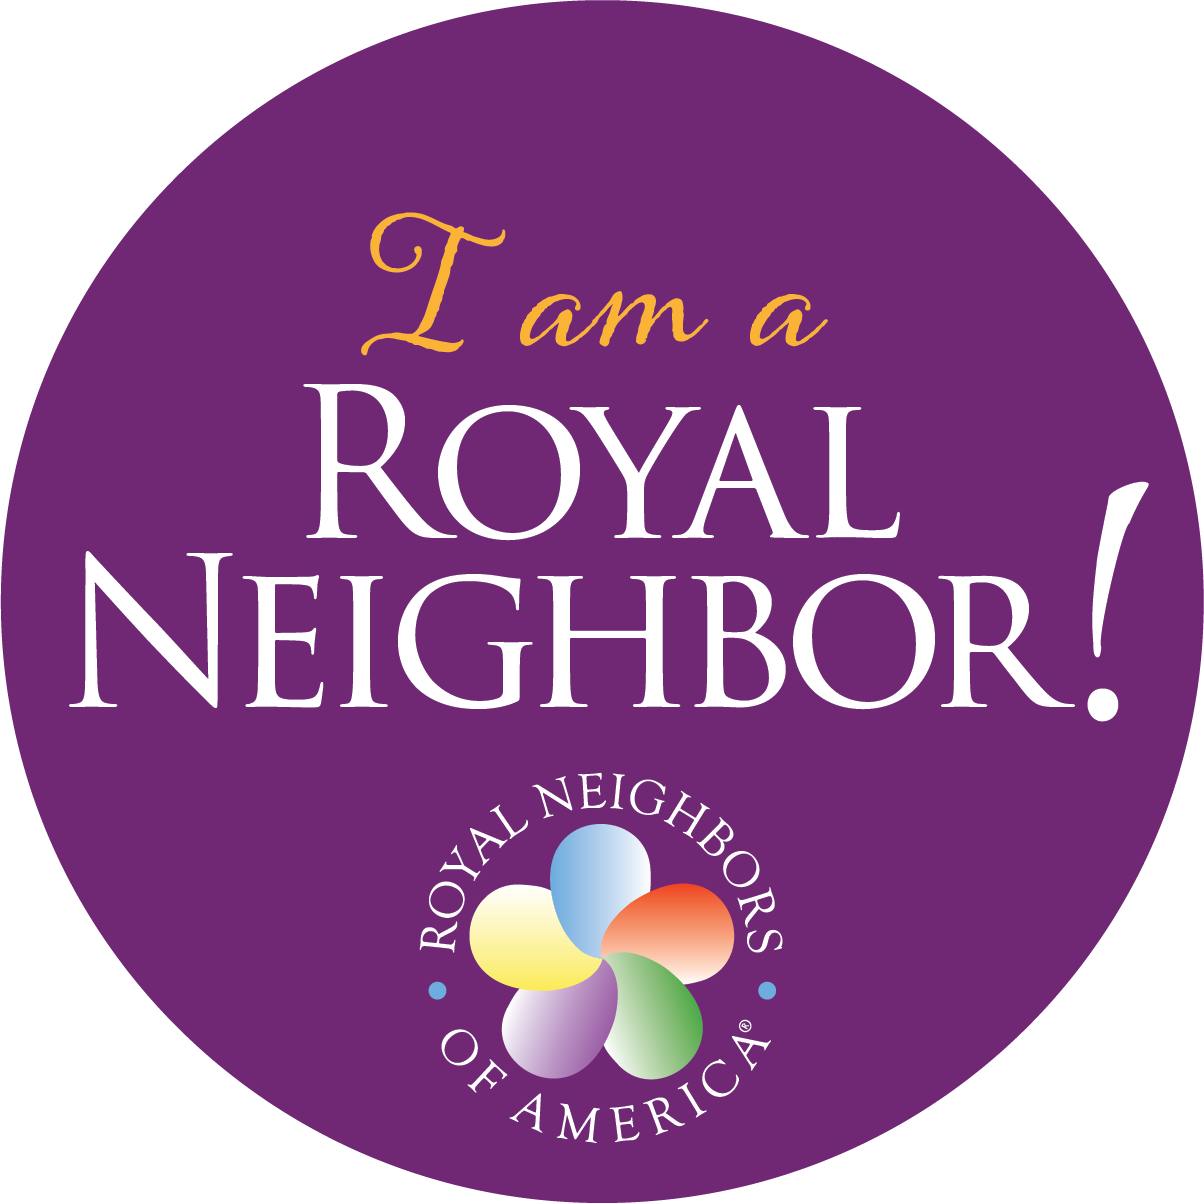 Decorative element with text: I Am A Royal Neighbor and Royal Neighbors logo.